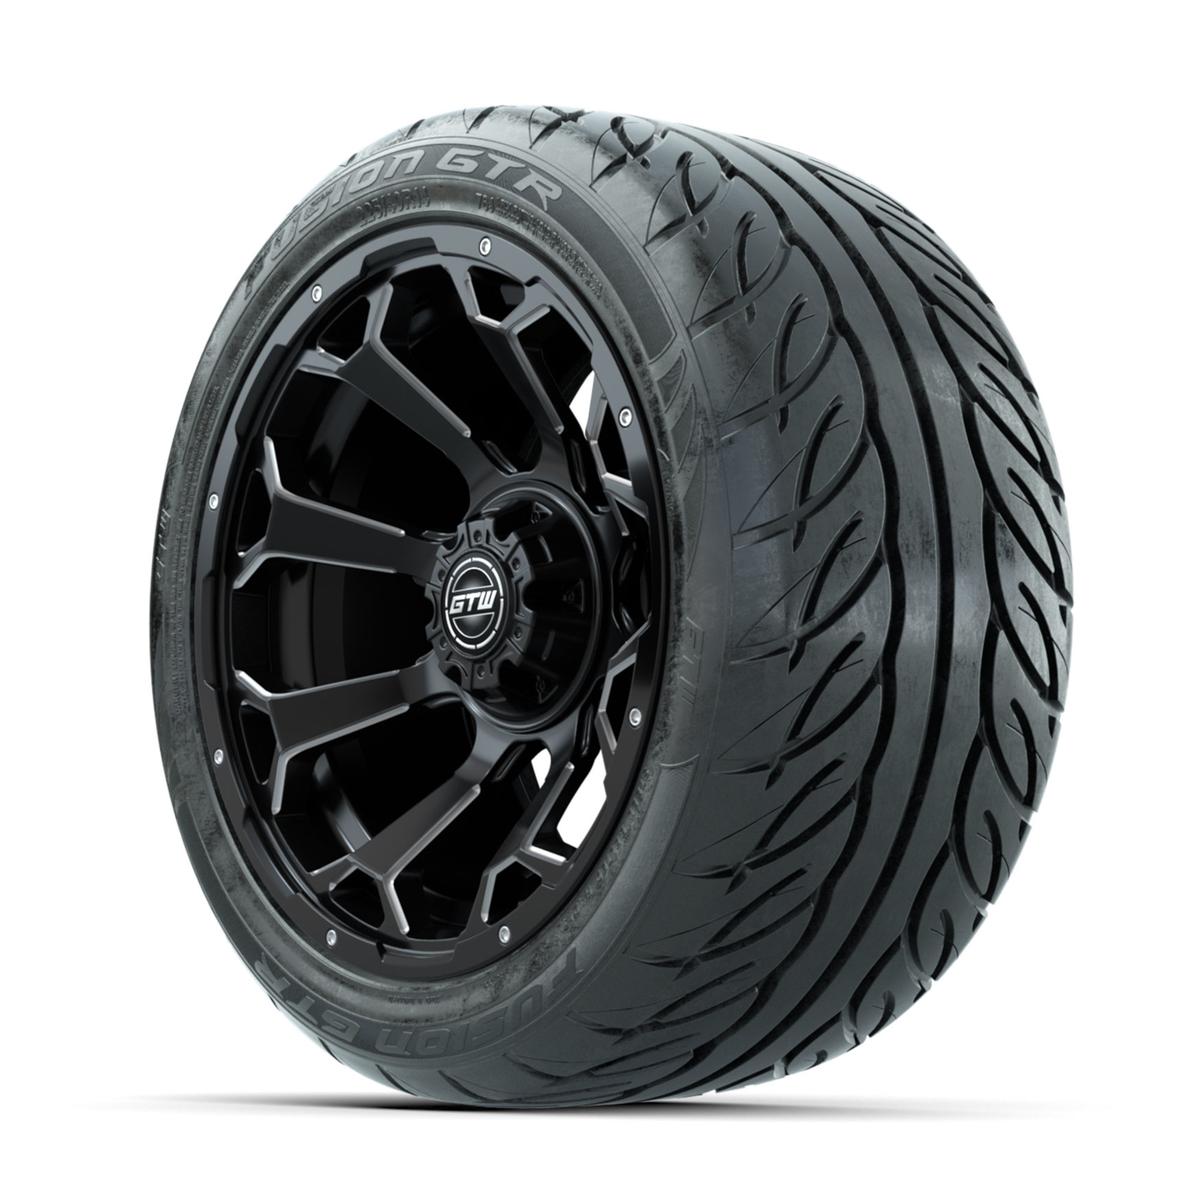 GTW Raven Off-Road Matte Black/Ball Milled 14 in Wheels with 225/40-R14 Fusion GTR Street Tires – Full Set